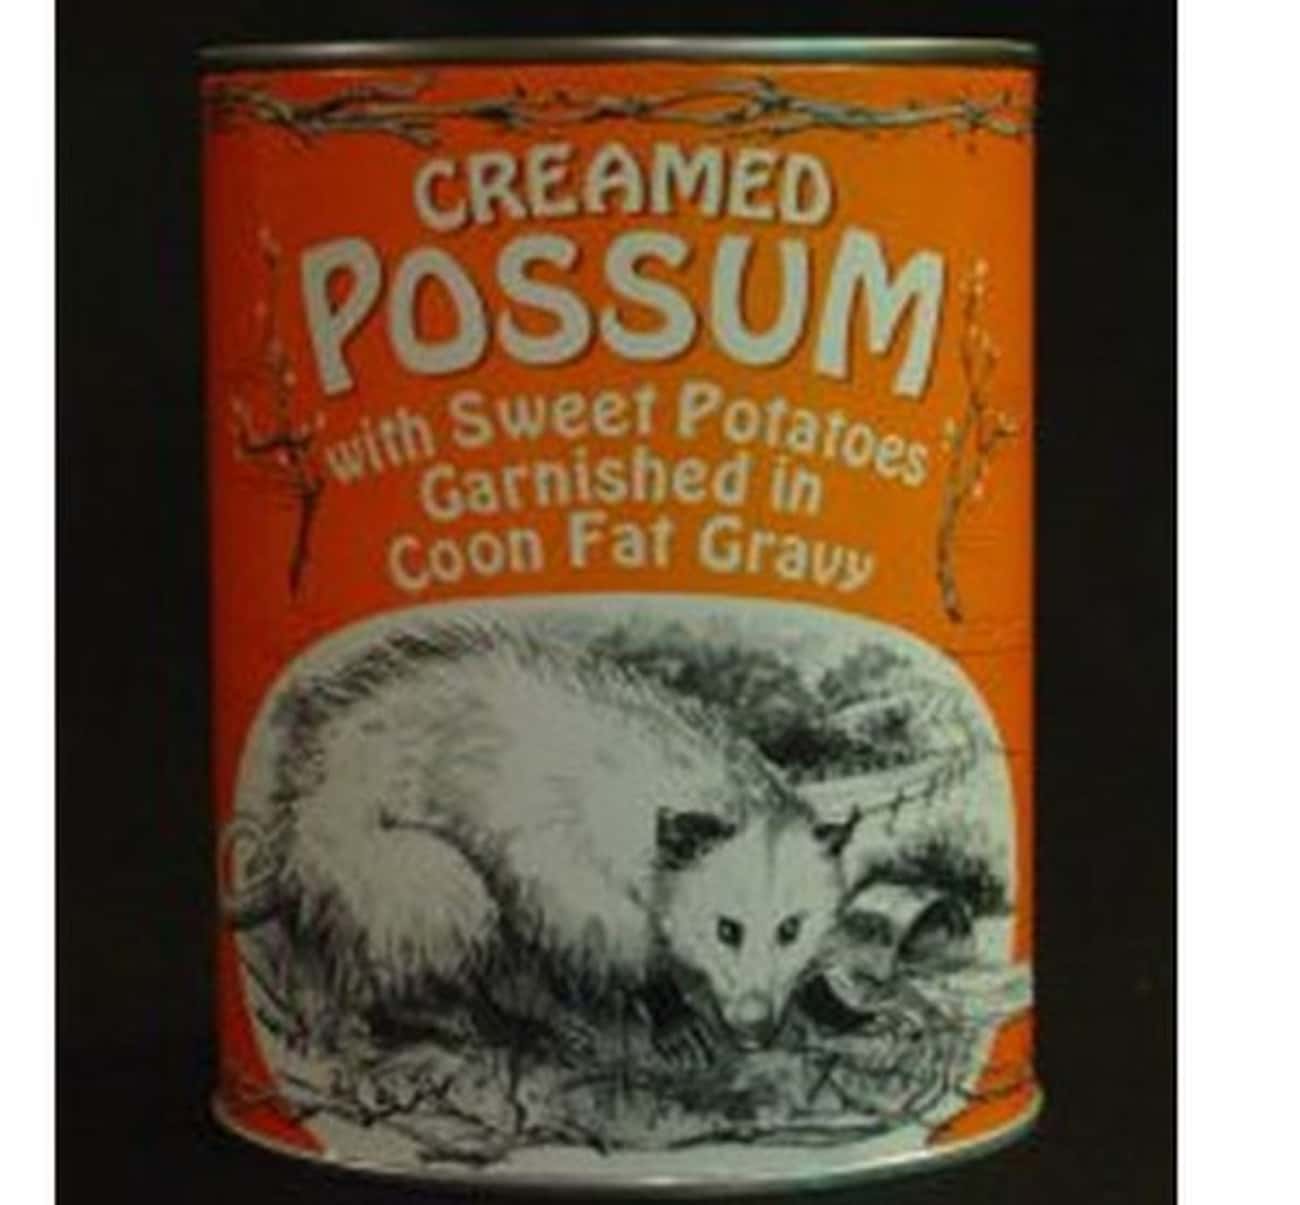 Canned Creamed Possum